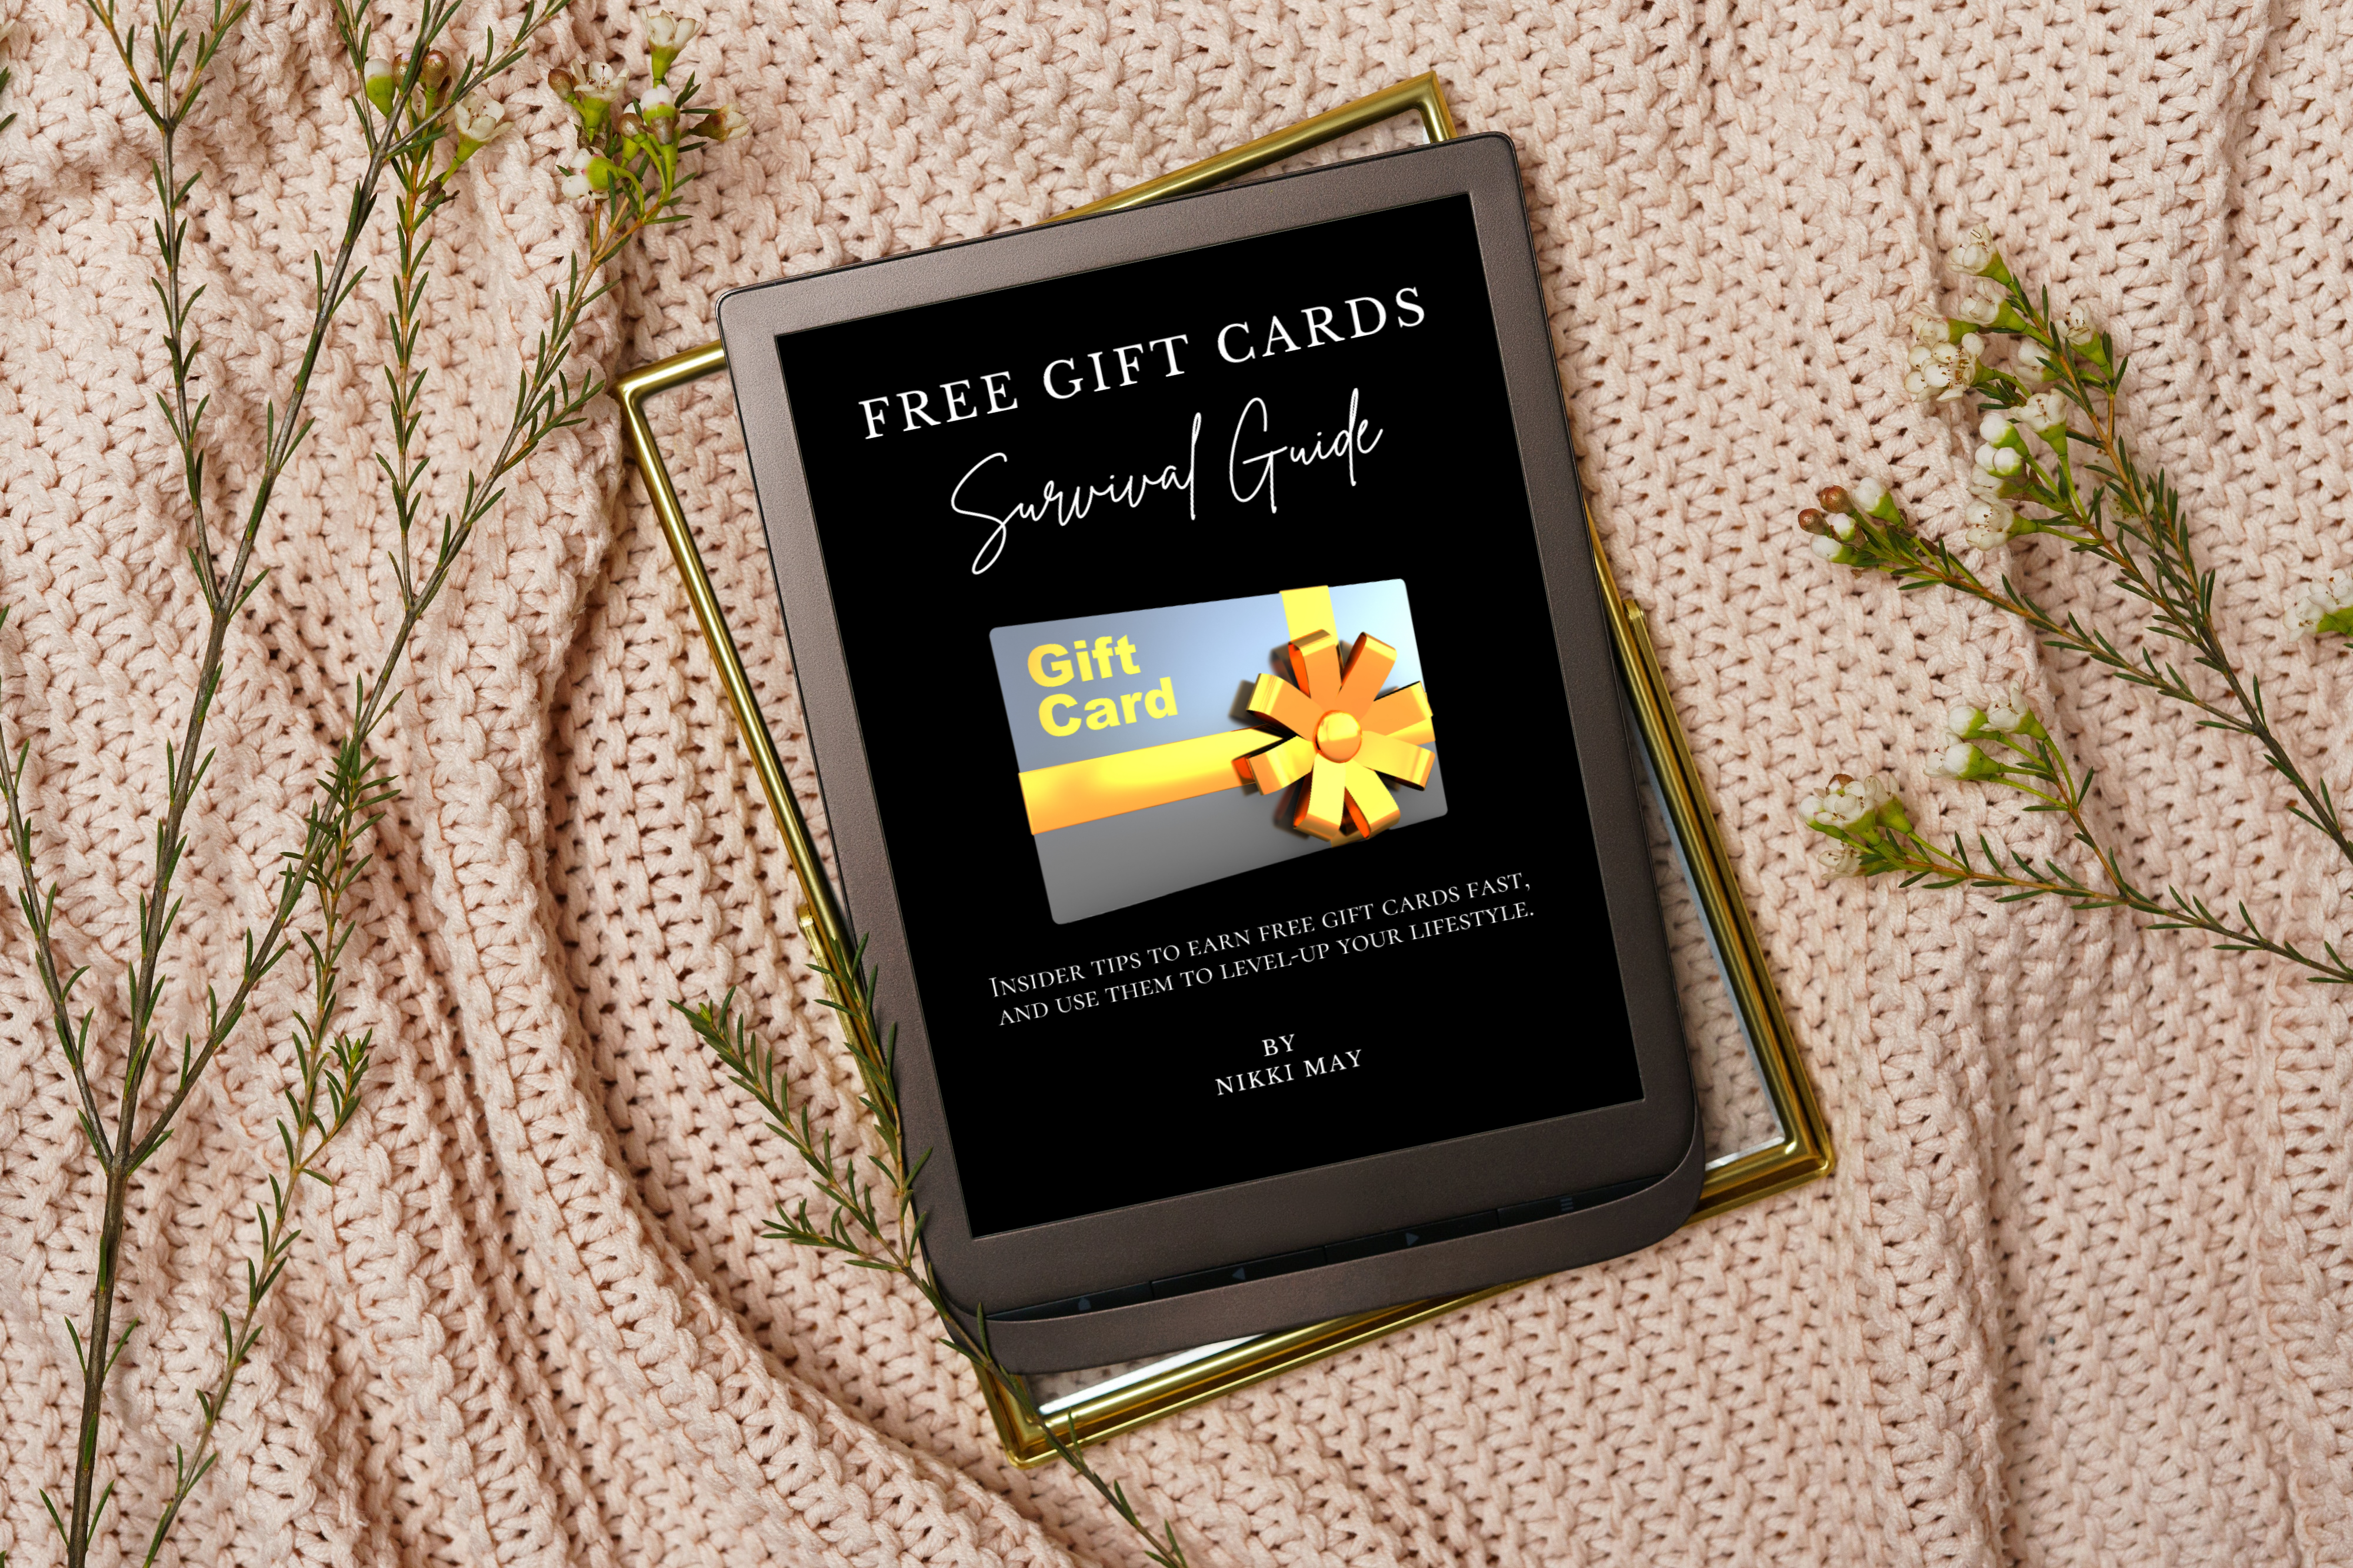 free gift cards survival guide image